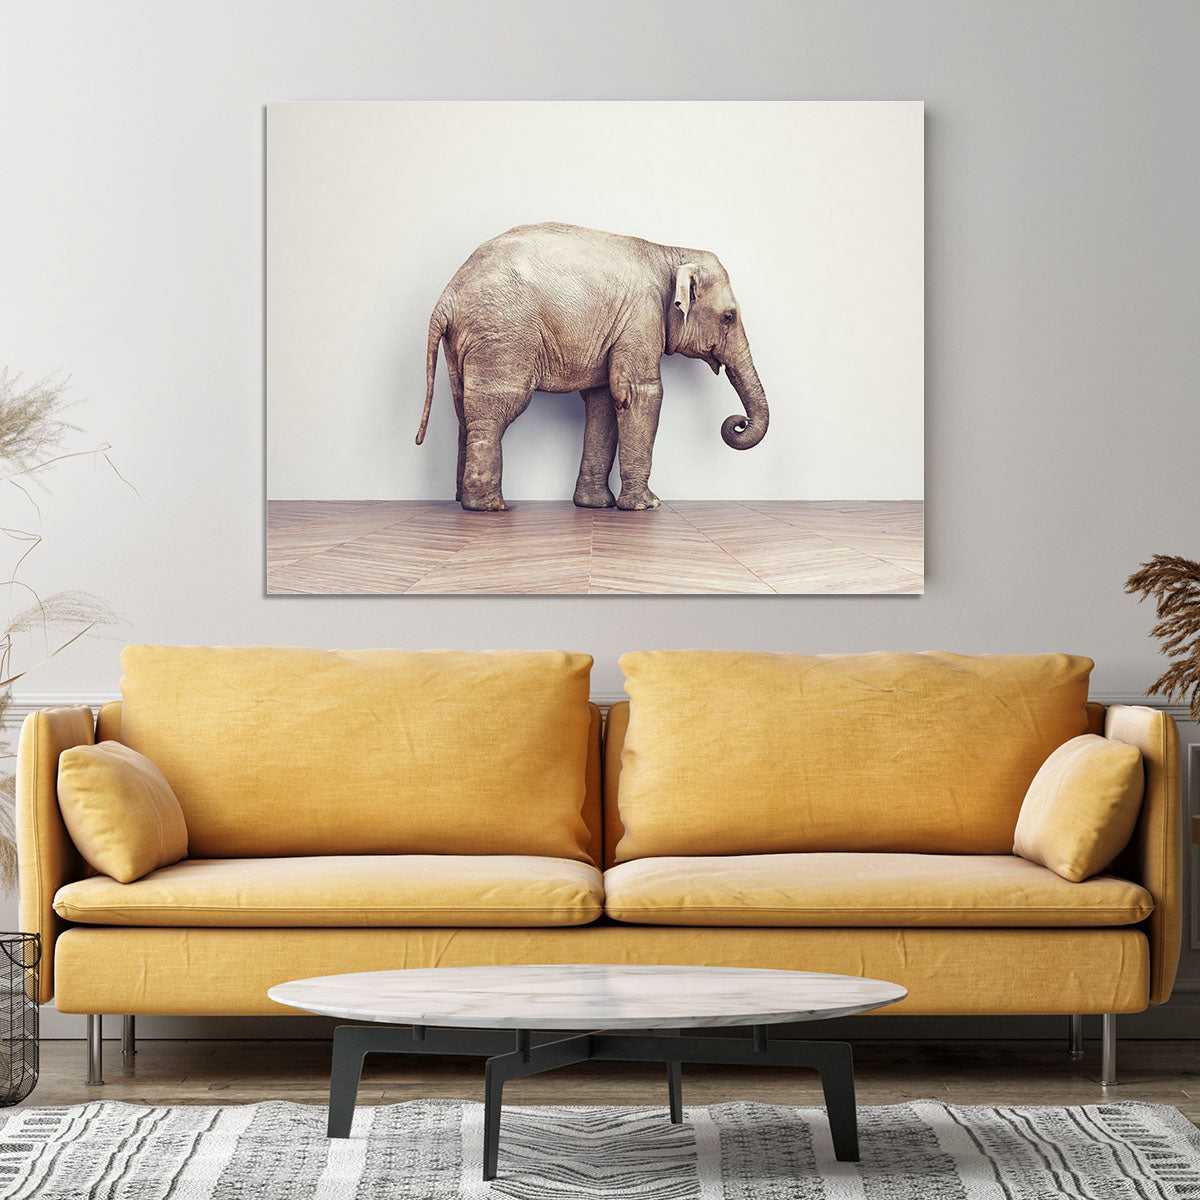 An elephant calm in the room near white wall. Creative concept Canvas Print or Poster - Canvas Art Rocks - 4